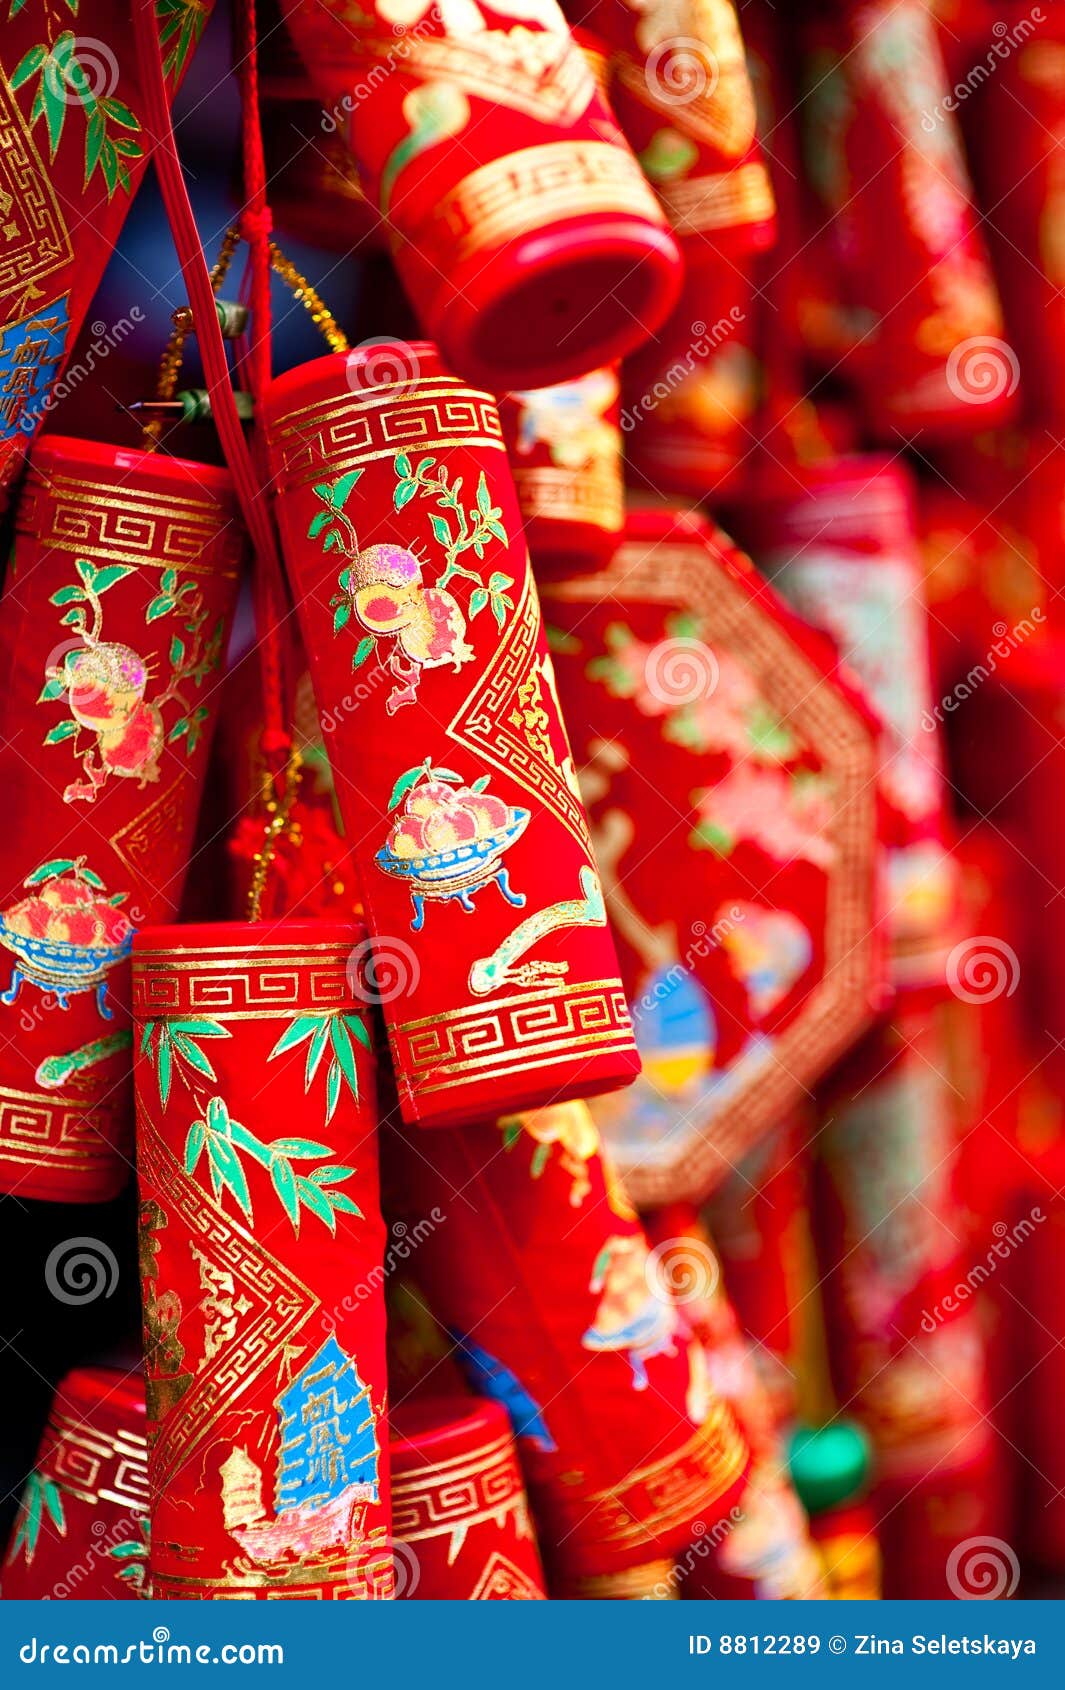 Chinese New Year Festivities Stock Image - Image of east, luck: 8812289